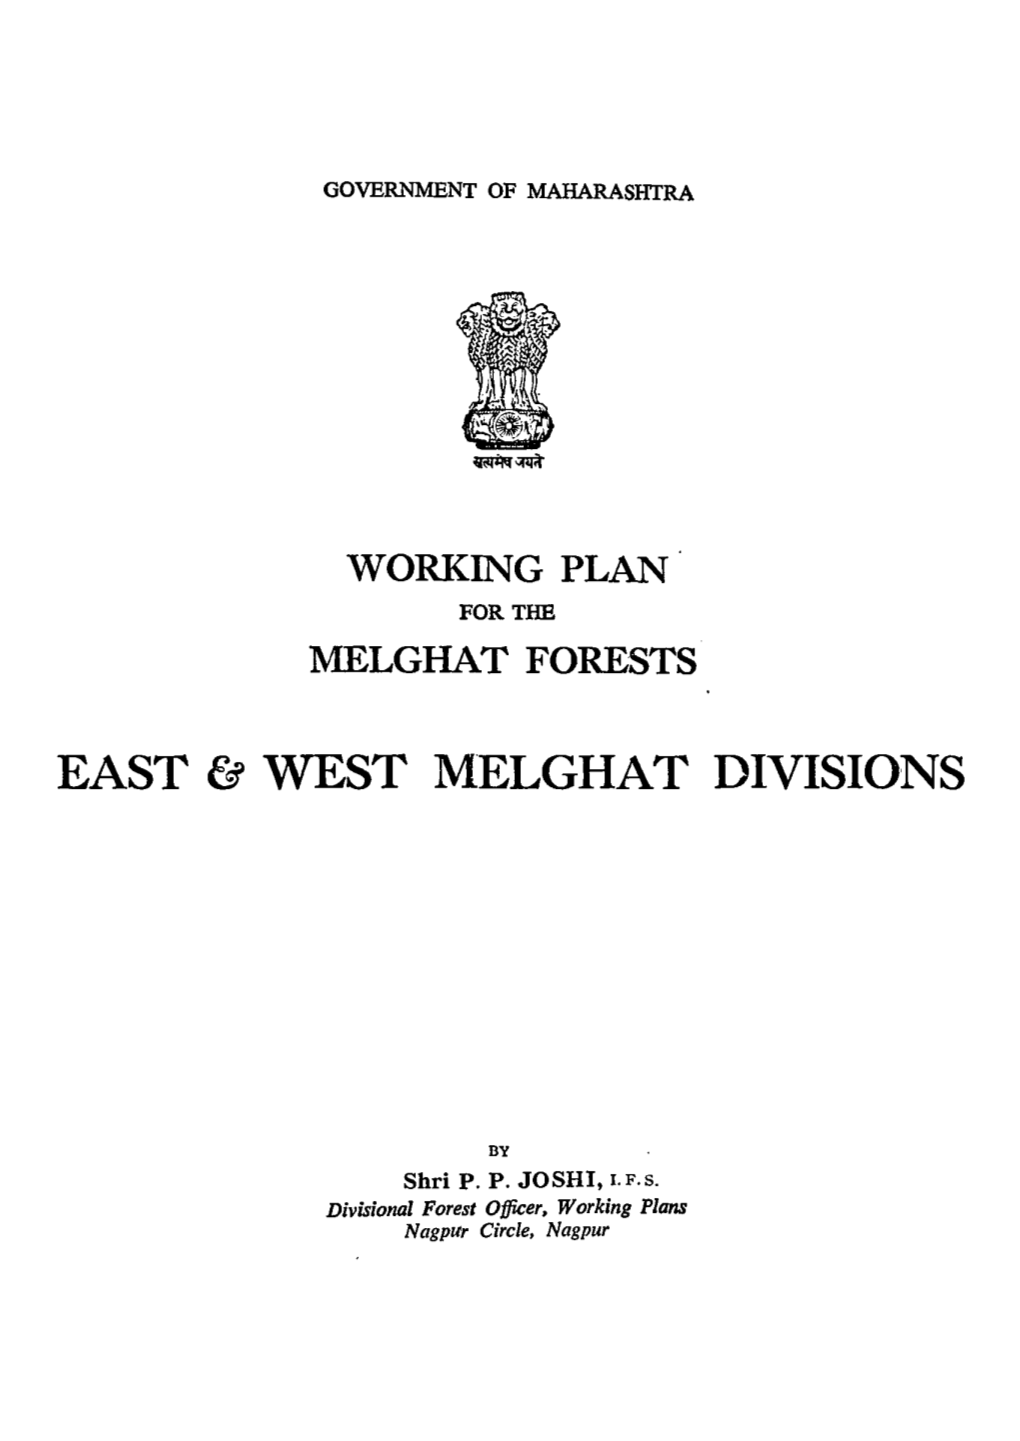 East & West Melghat Divisions